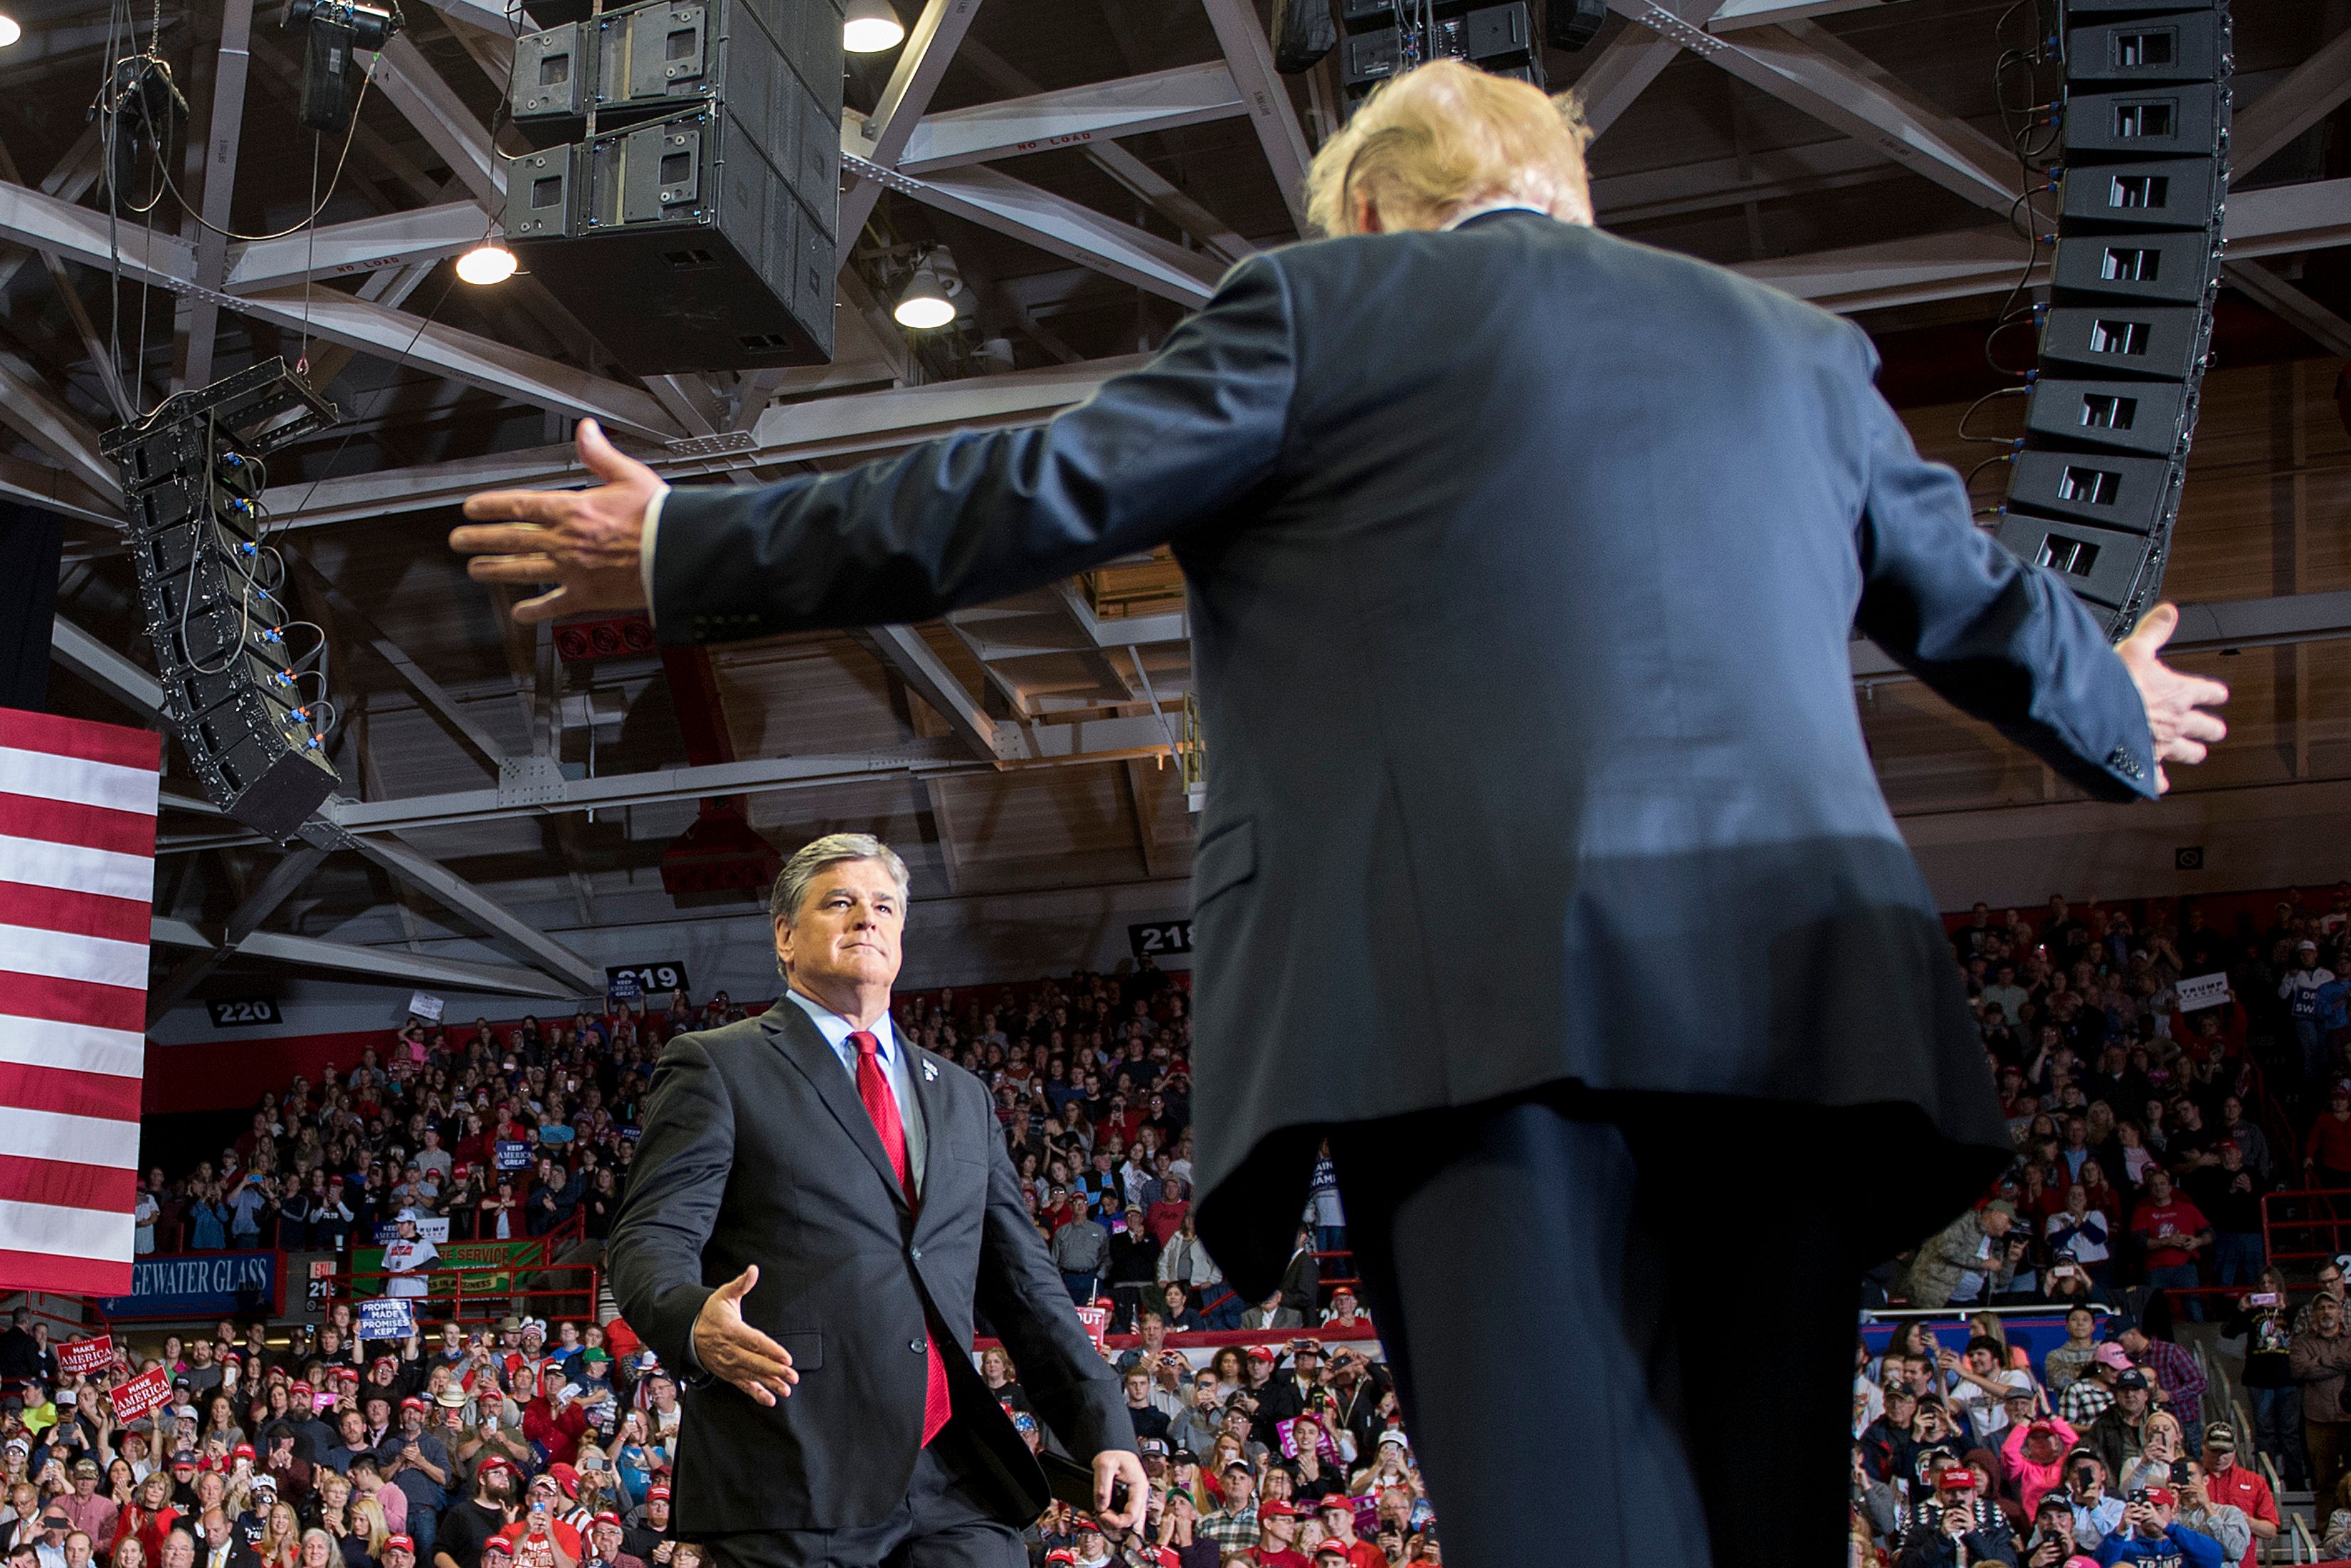 Trump embraces Sean Hannity at a Missouri rally